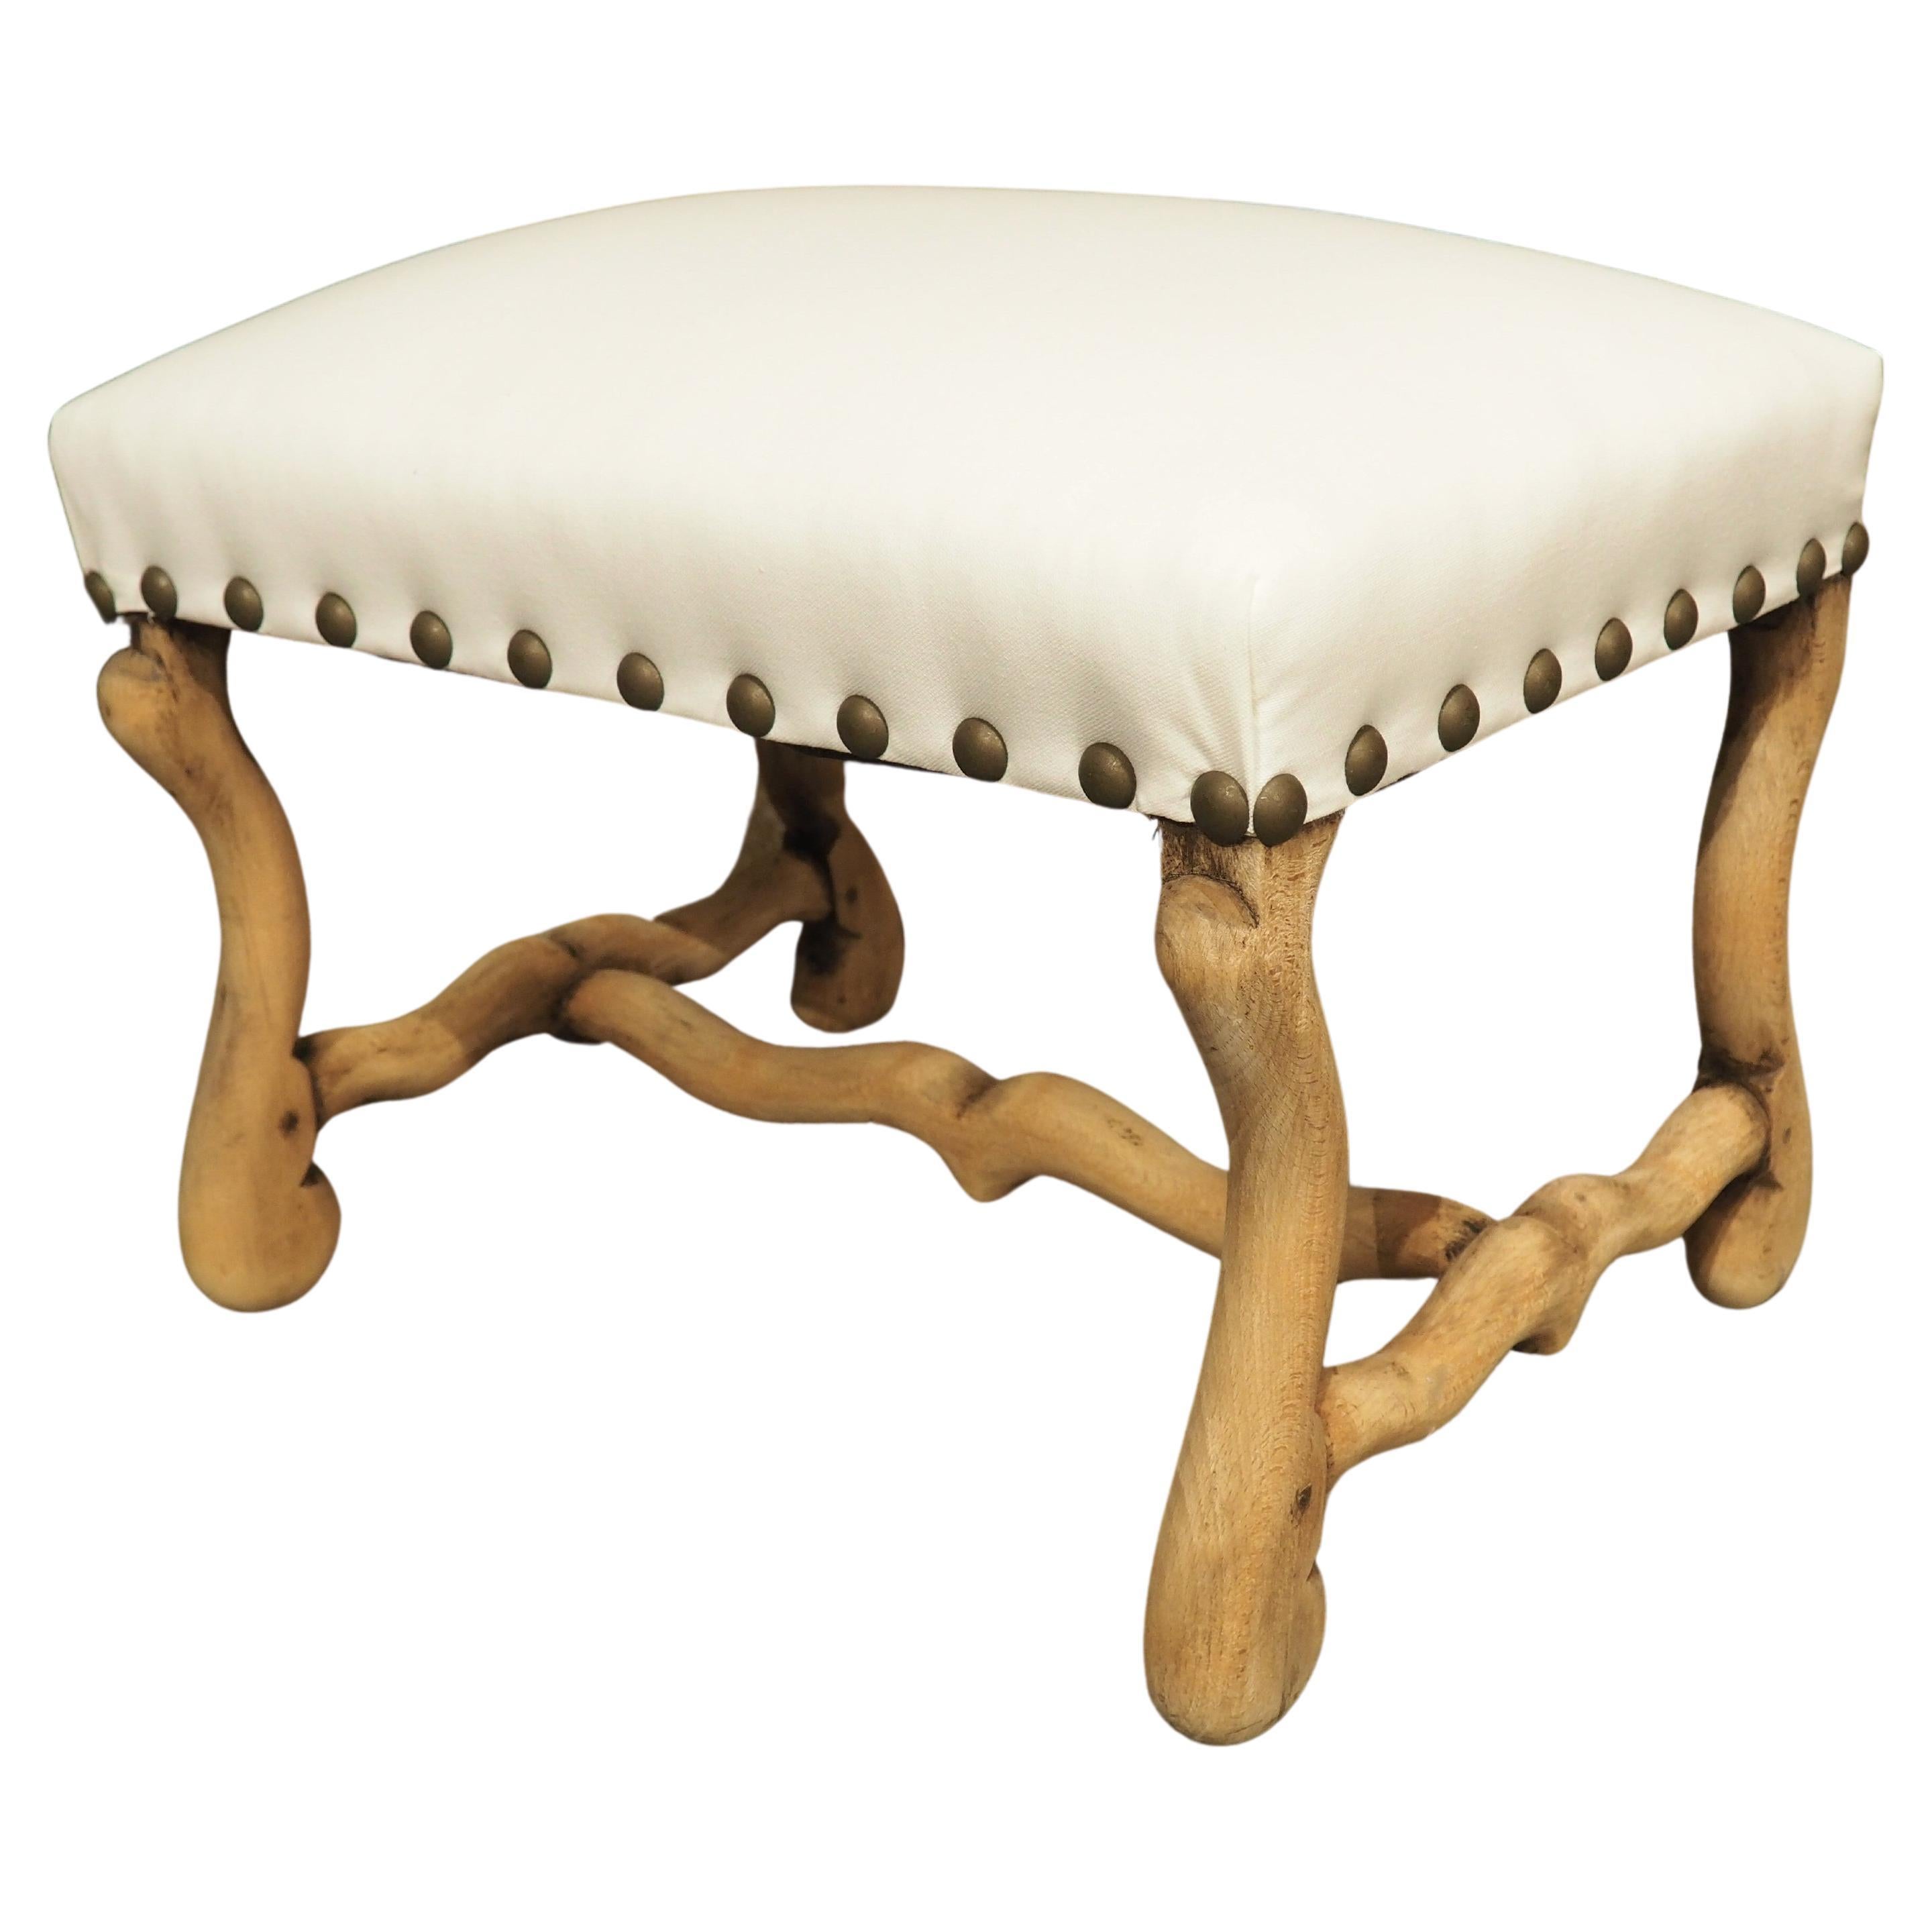 Bleached French Os De Mouton Tabouret Stool, White Cotton Upholstery, C. 1900